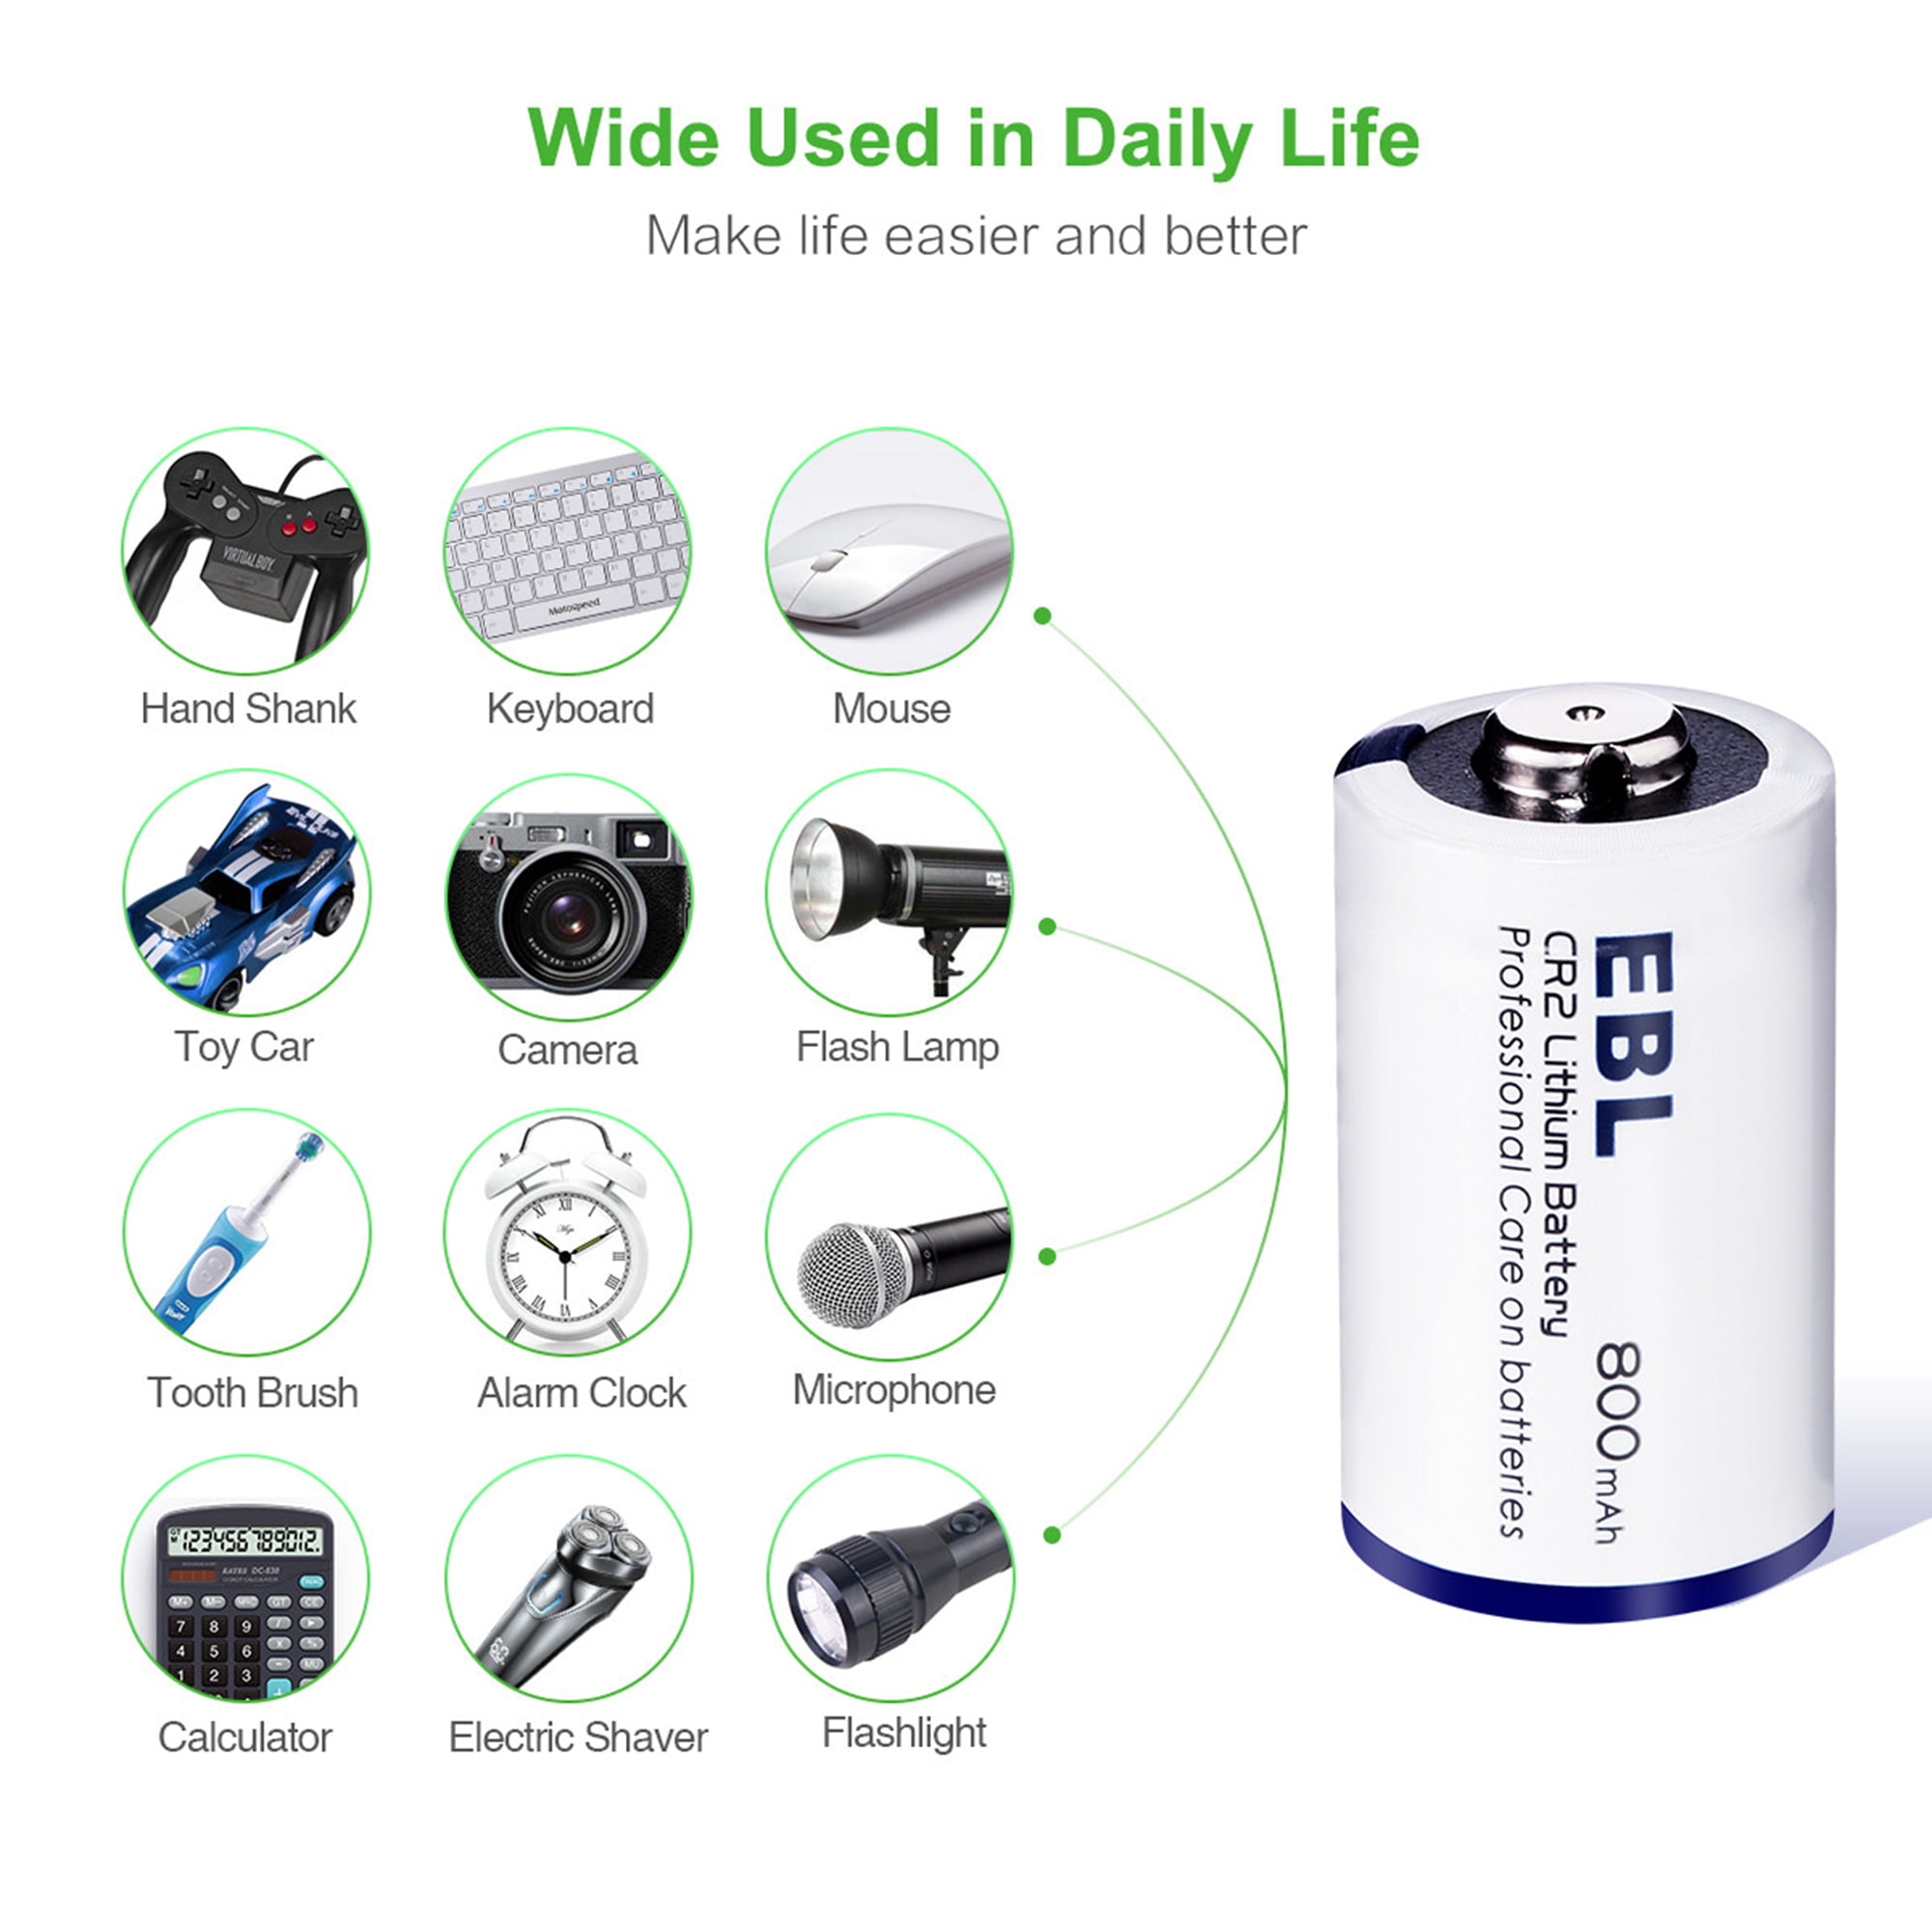 EBL CR2 Rechargeable Batteries with Battery Charger – EBLOfficial